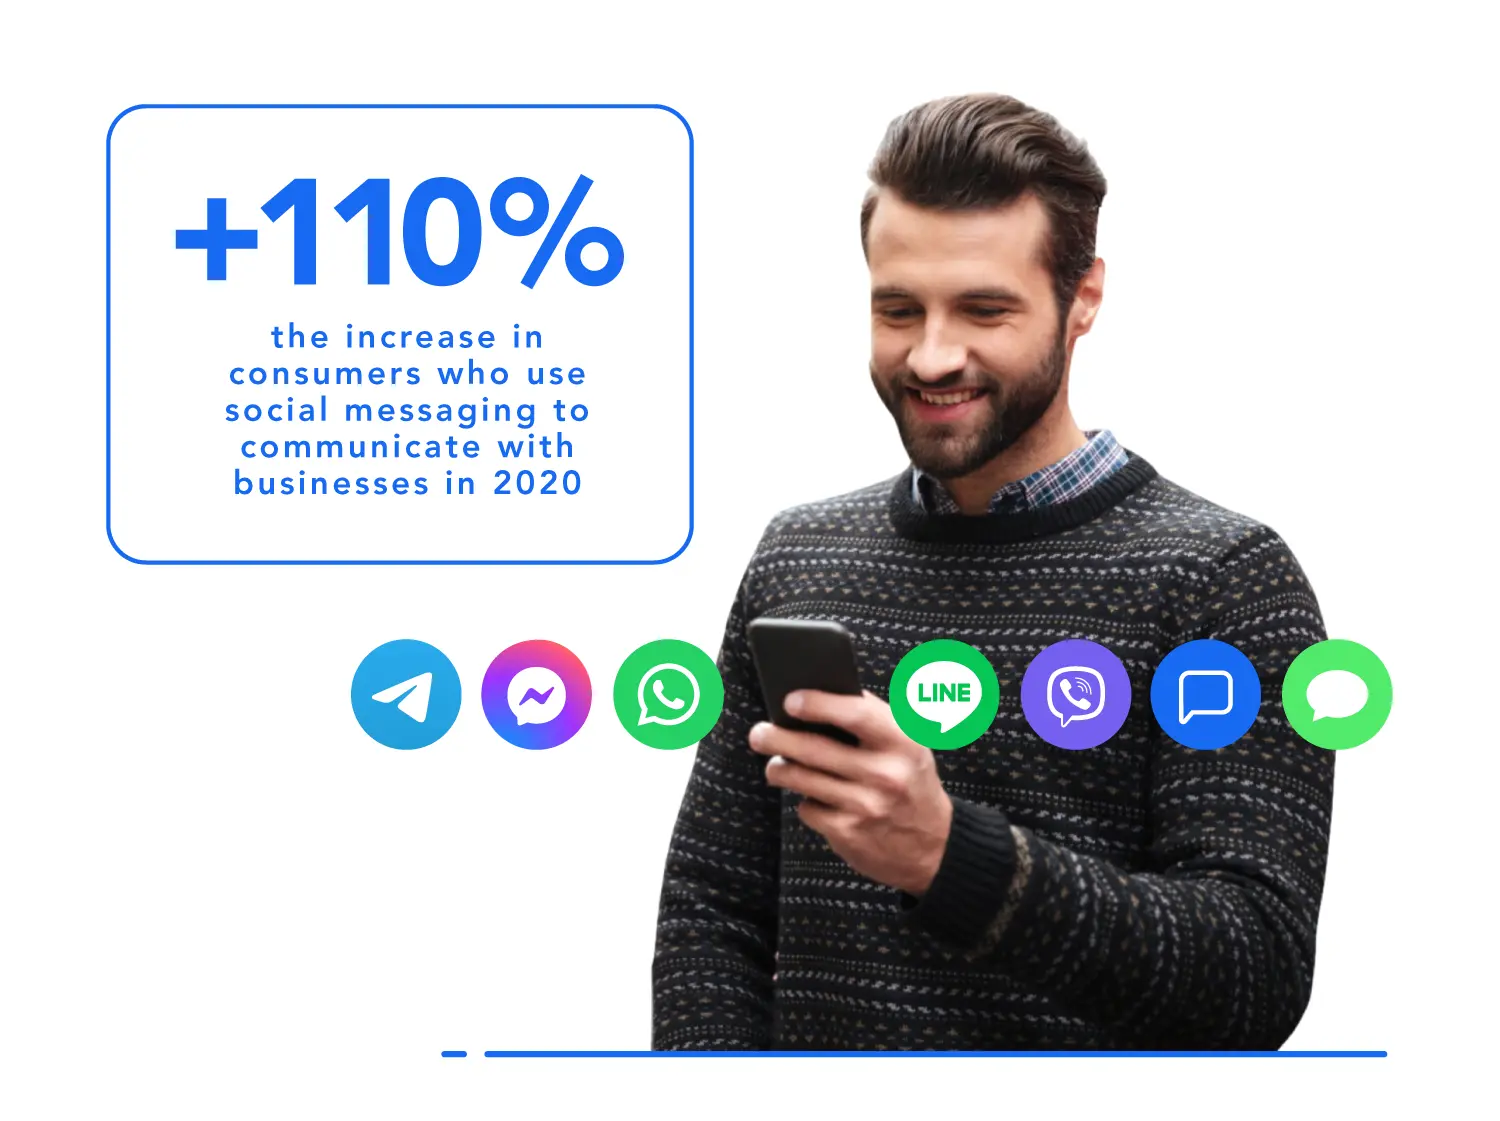 Financial Service showing a 110% increace in the number of people communicating over messaging apps to business